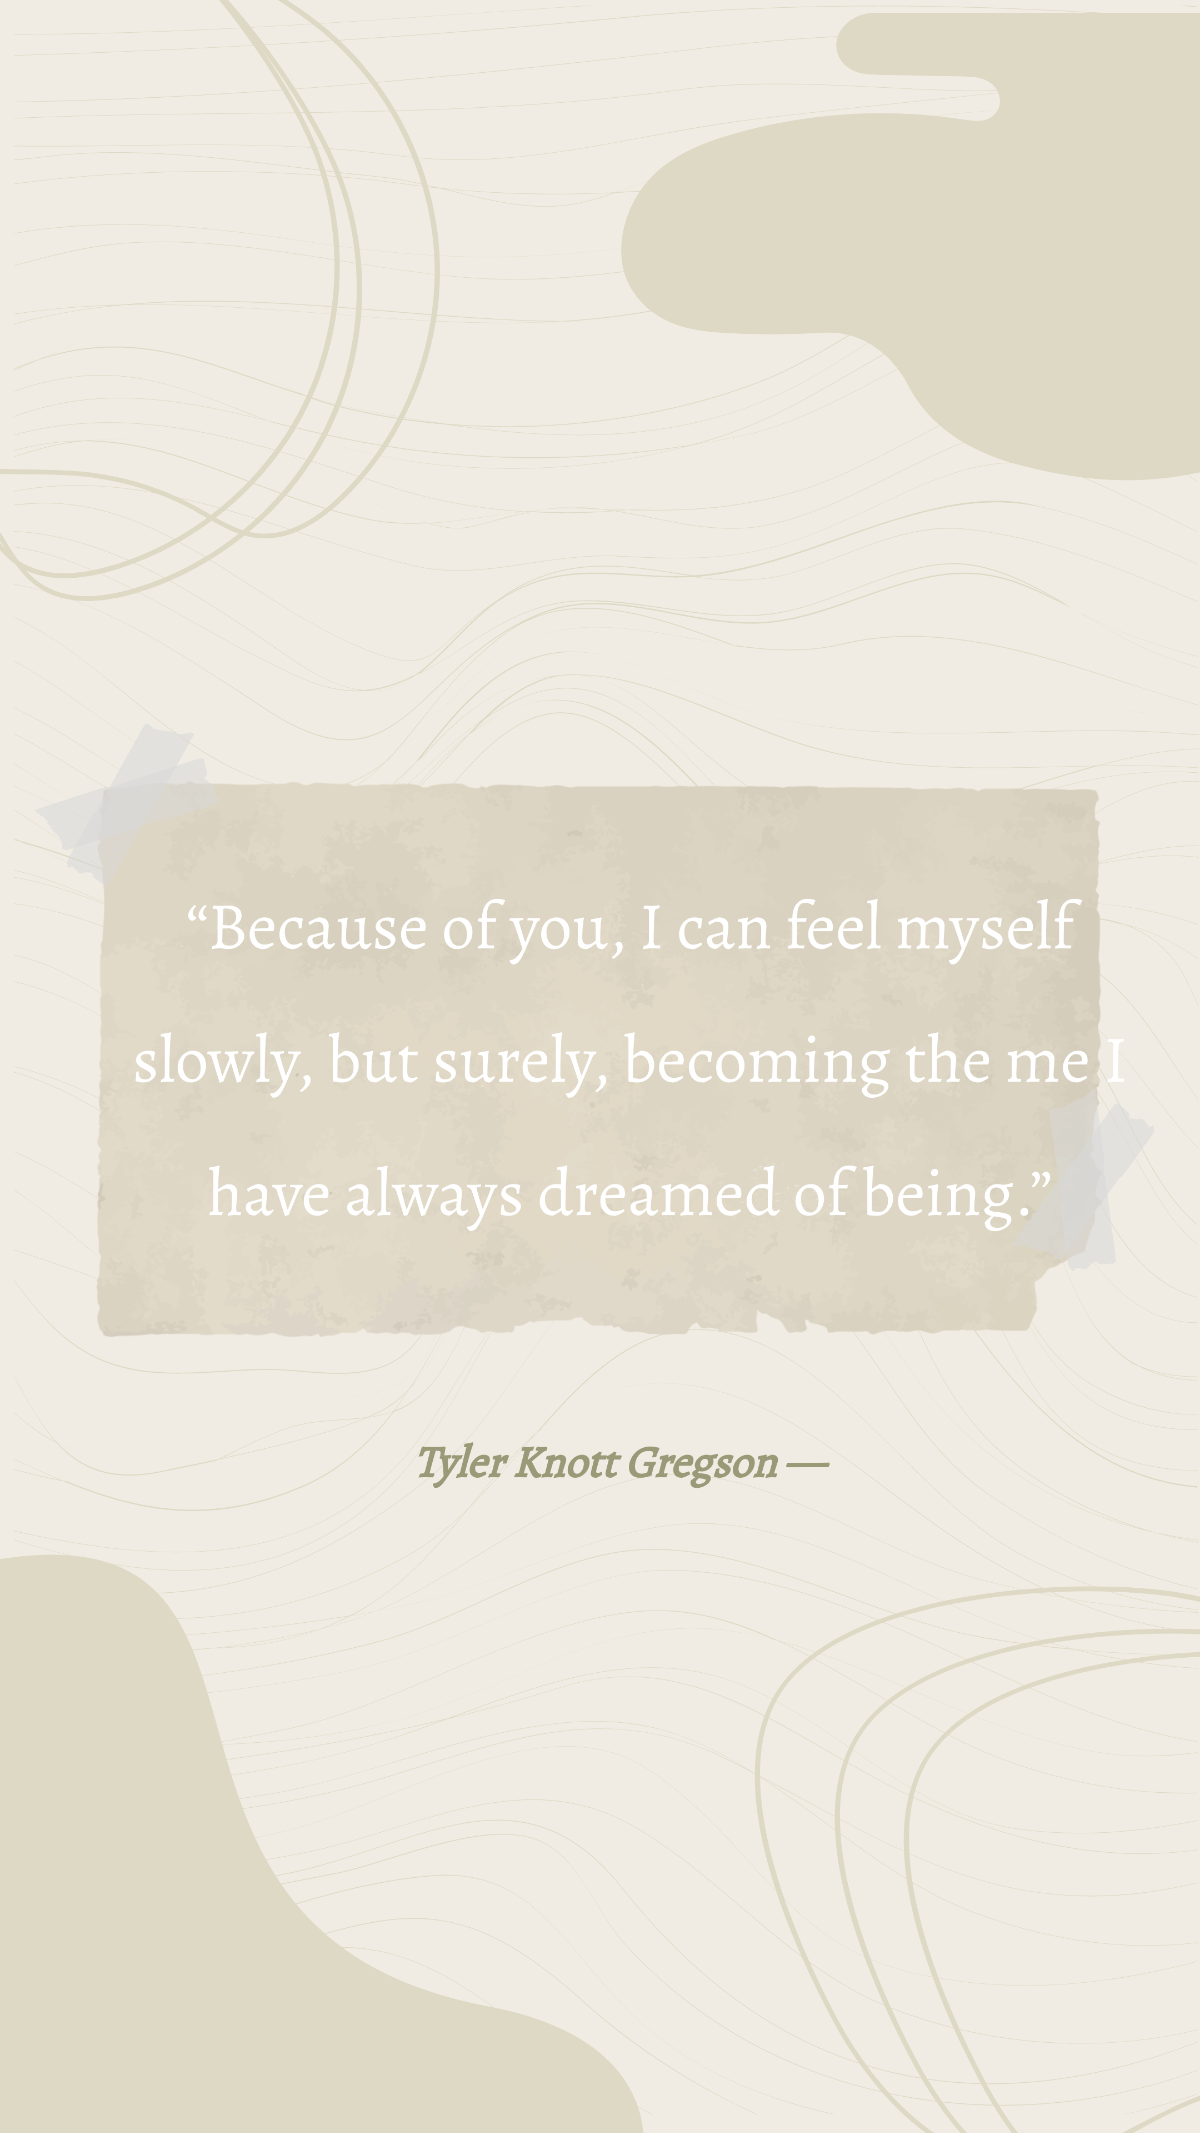 Tyler Knott Gregson — “Because of you, I can feel myself slowly, but surely, becoming the me I have always dreamed of being.” Template